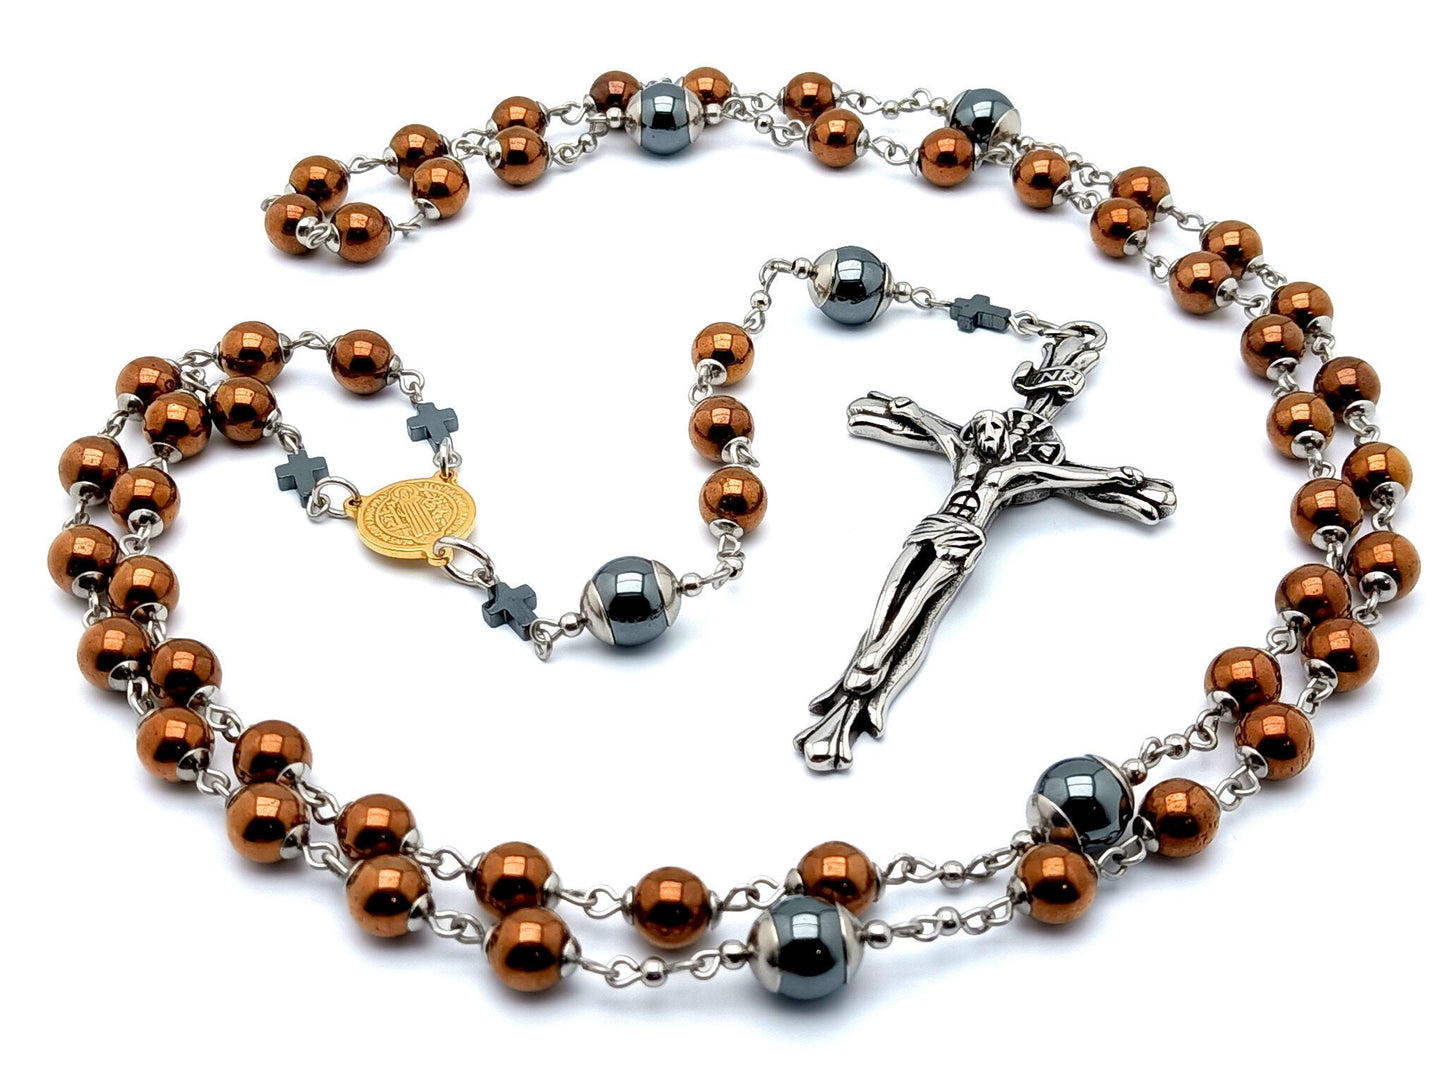 Saint Benedict unique rosary beads copper and grey hematite gemstone rosary beads with stainless steel crucifix and hematite linking cross beads.